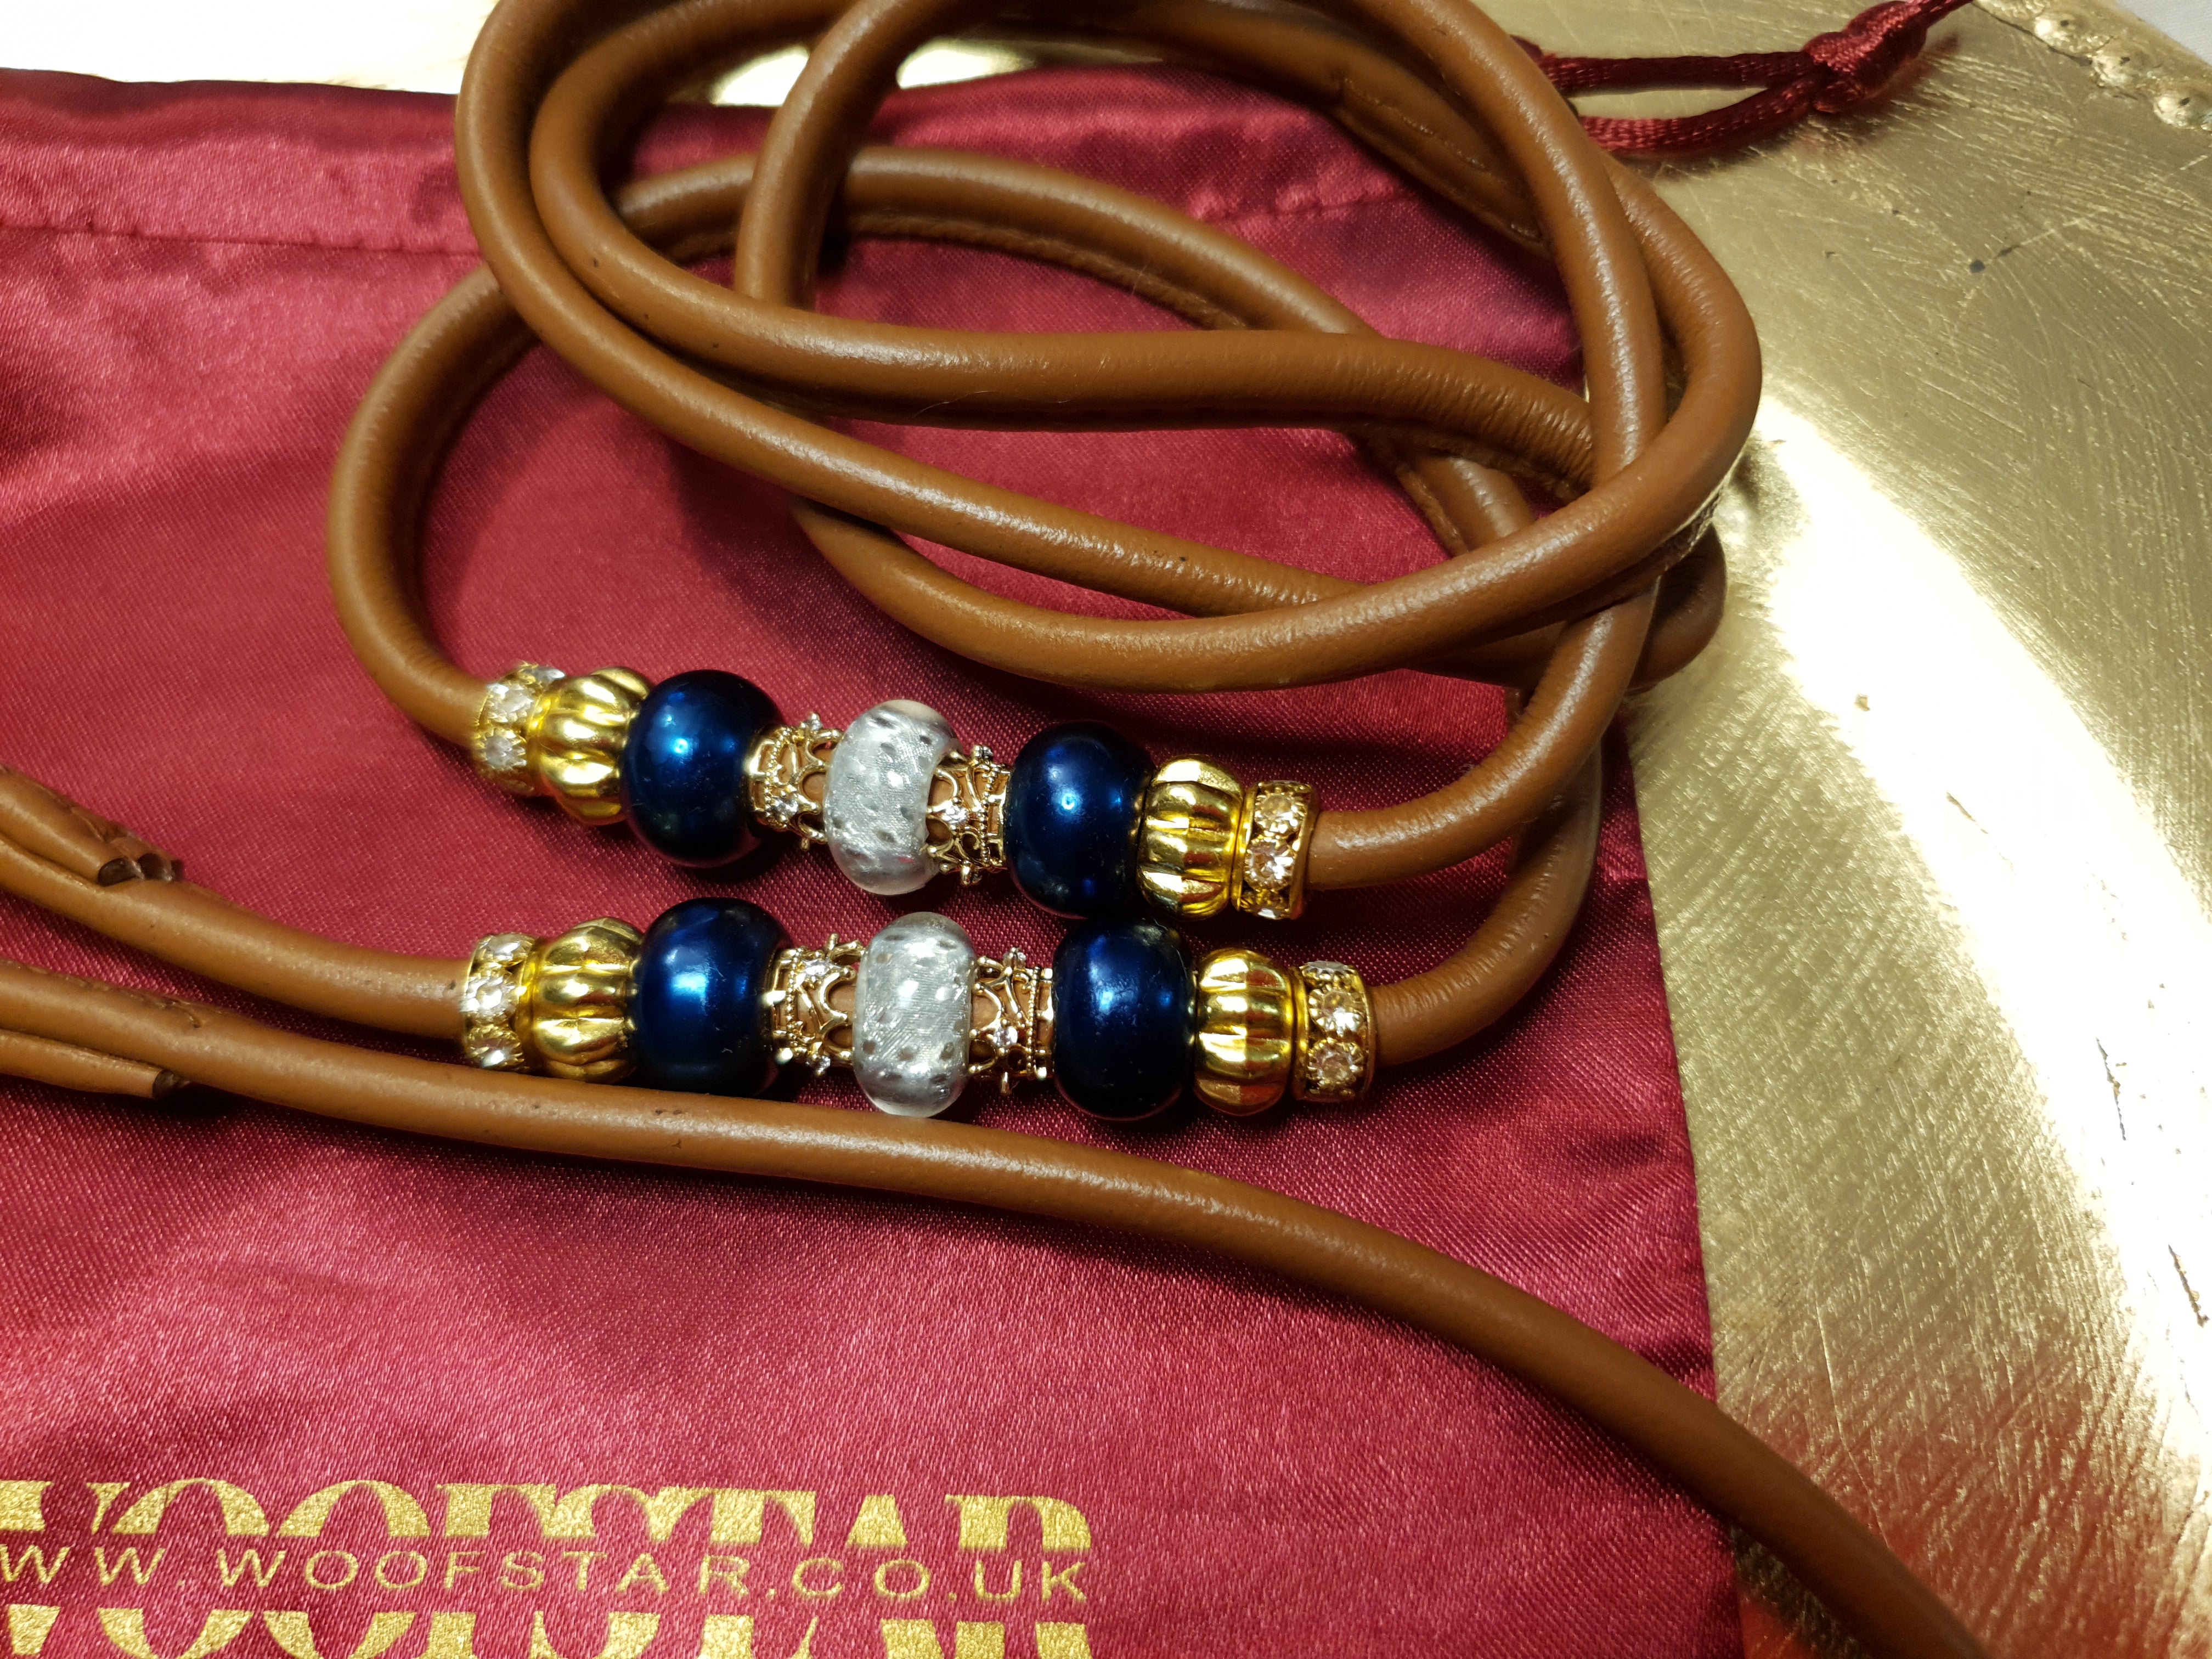 Leather Dog Show Slip Lead with beads